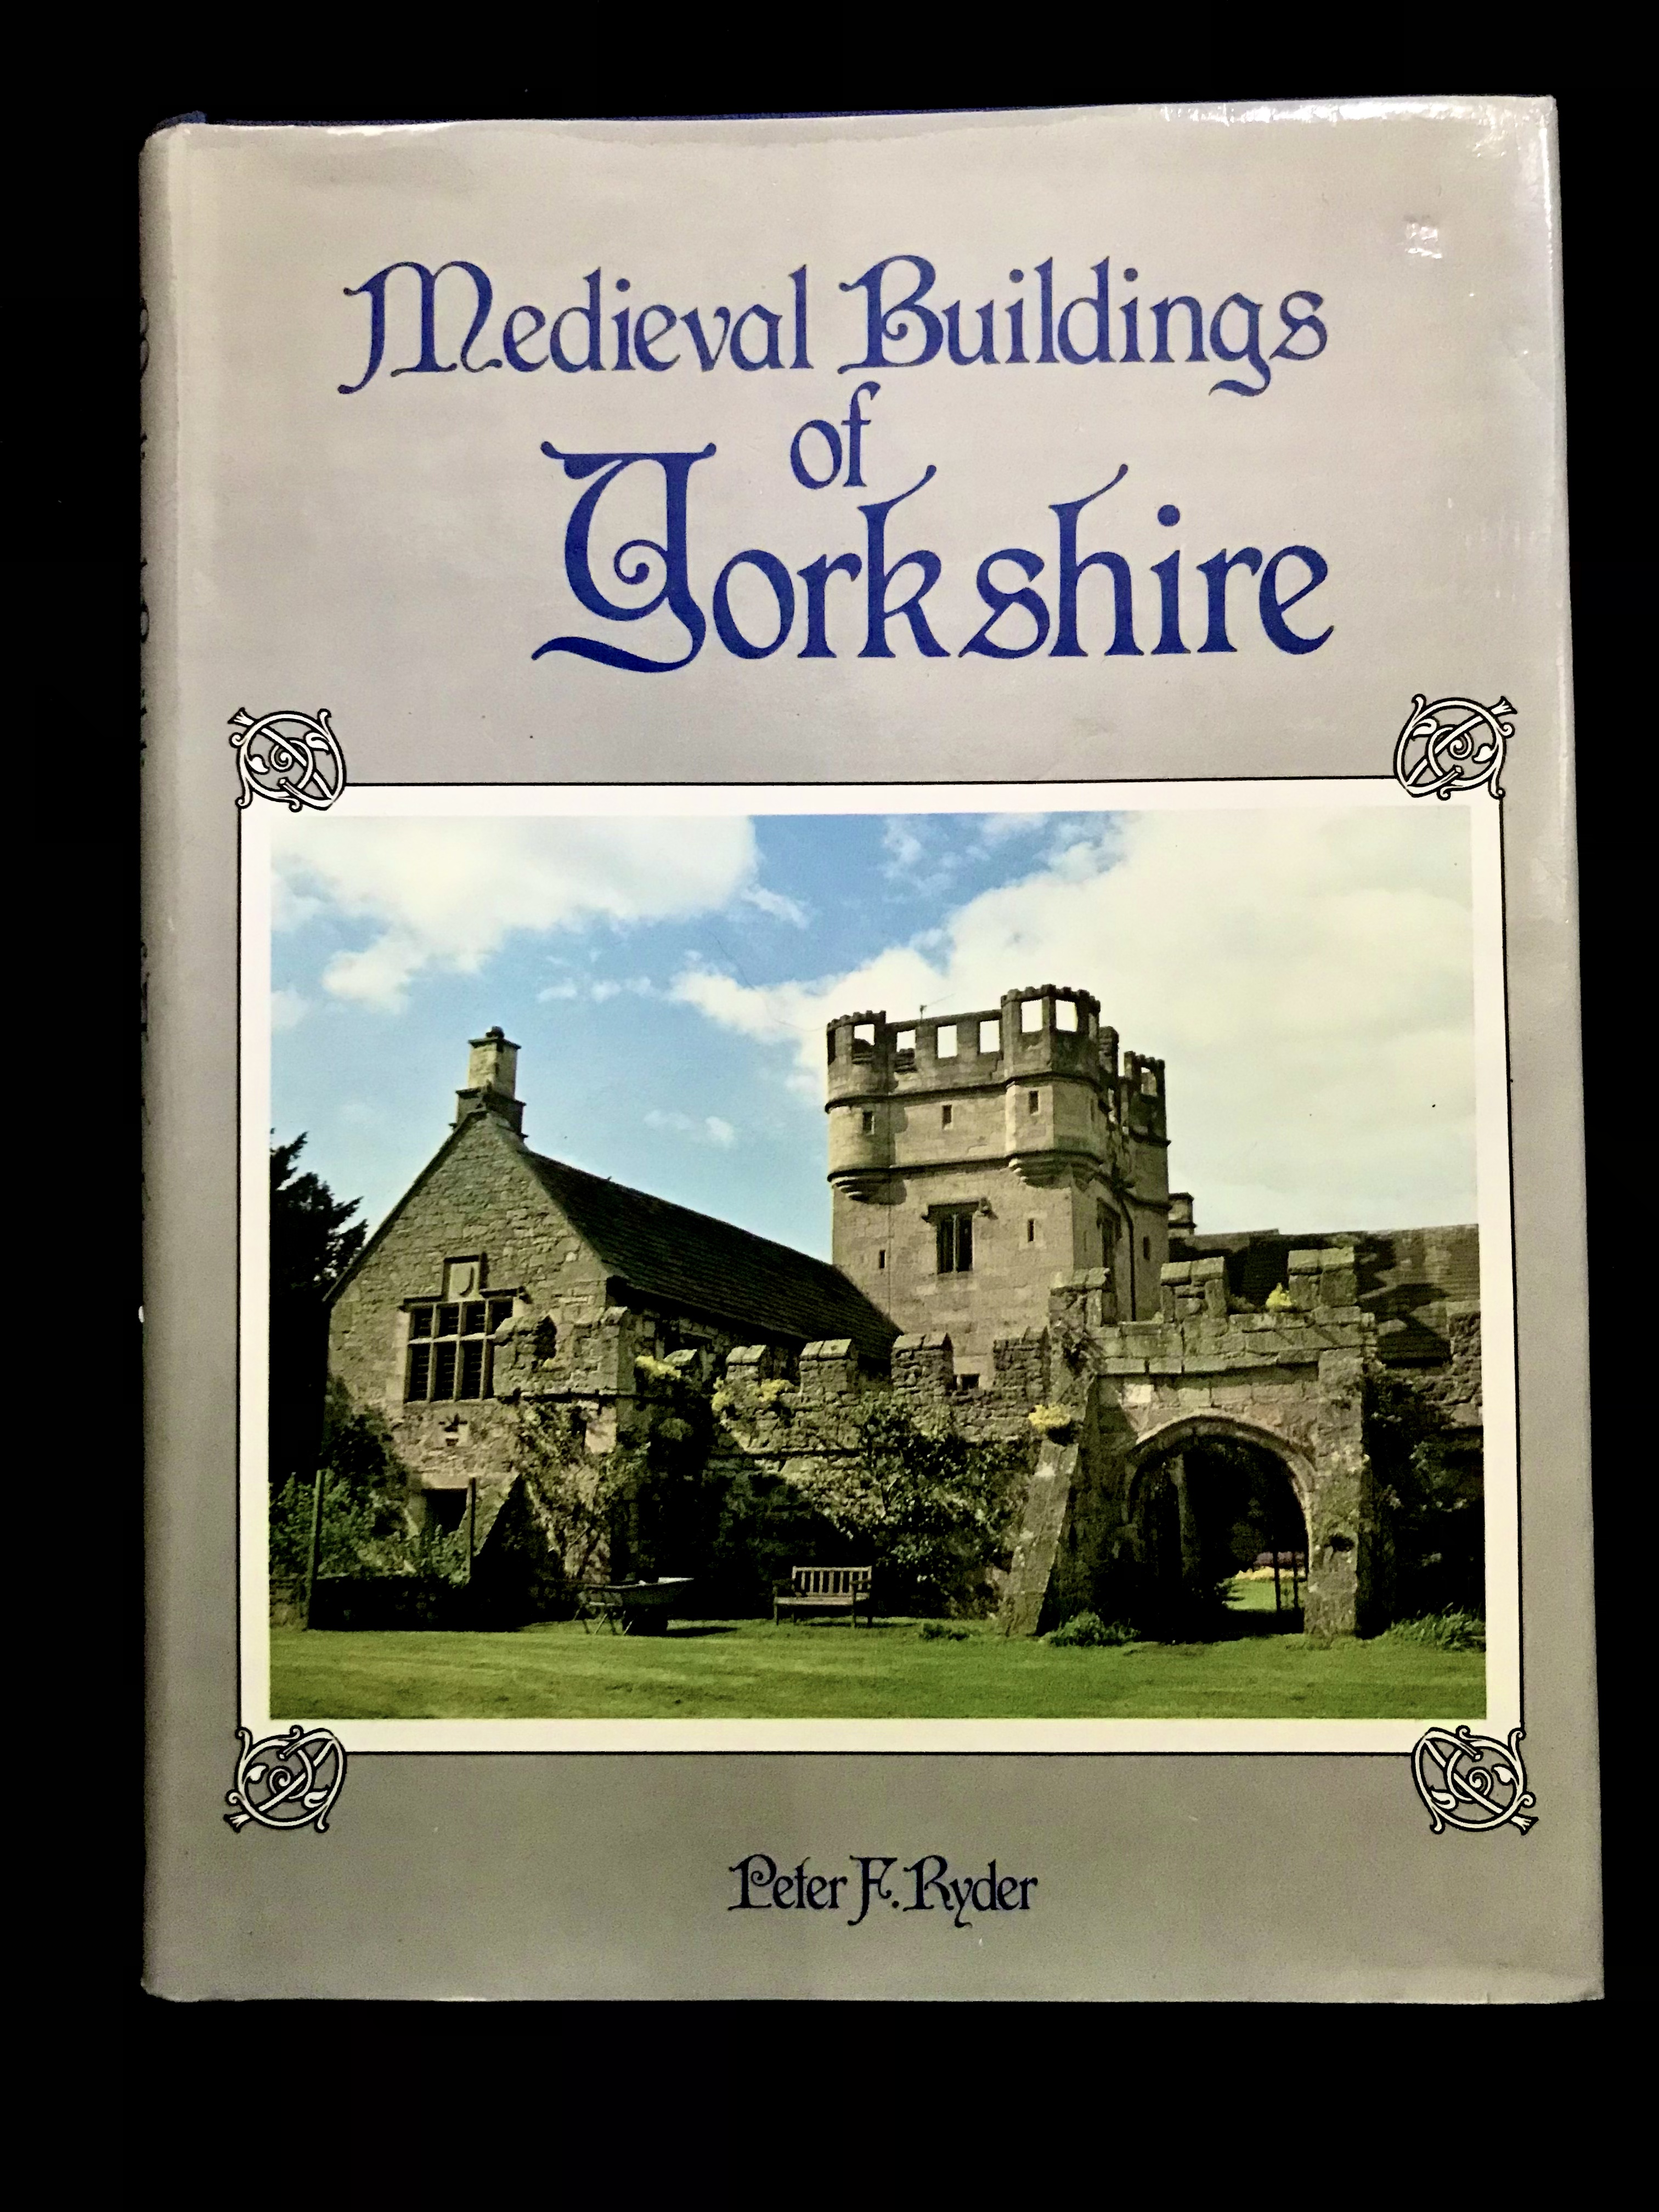 Medieval Buildings of Yorkshire by Peter Ryder